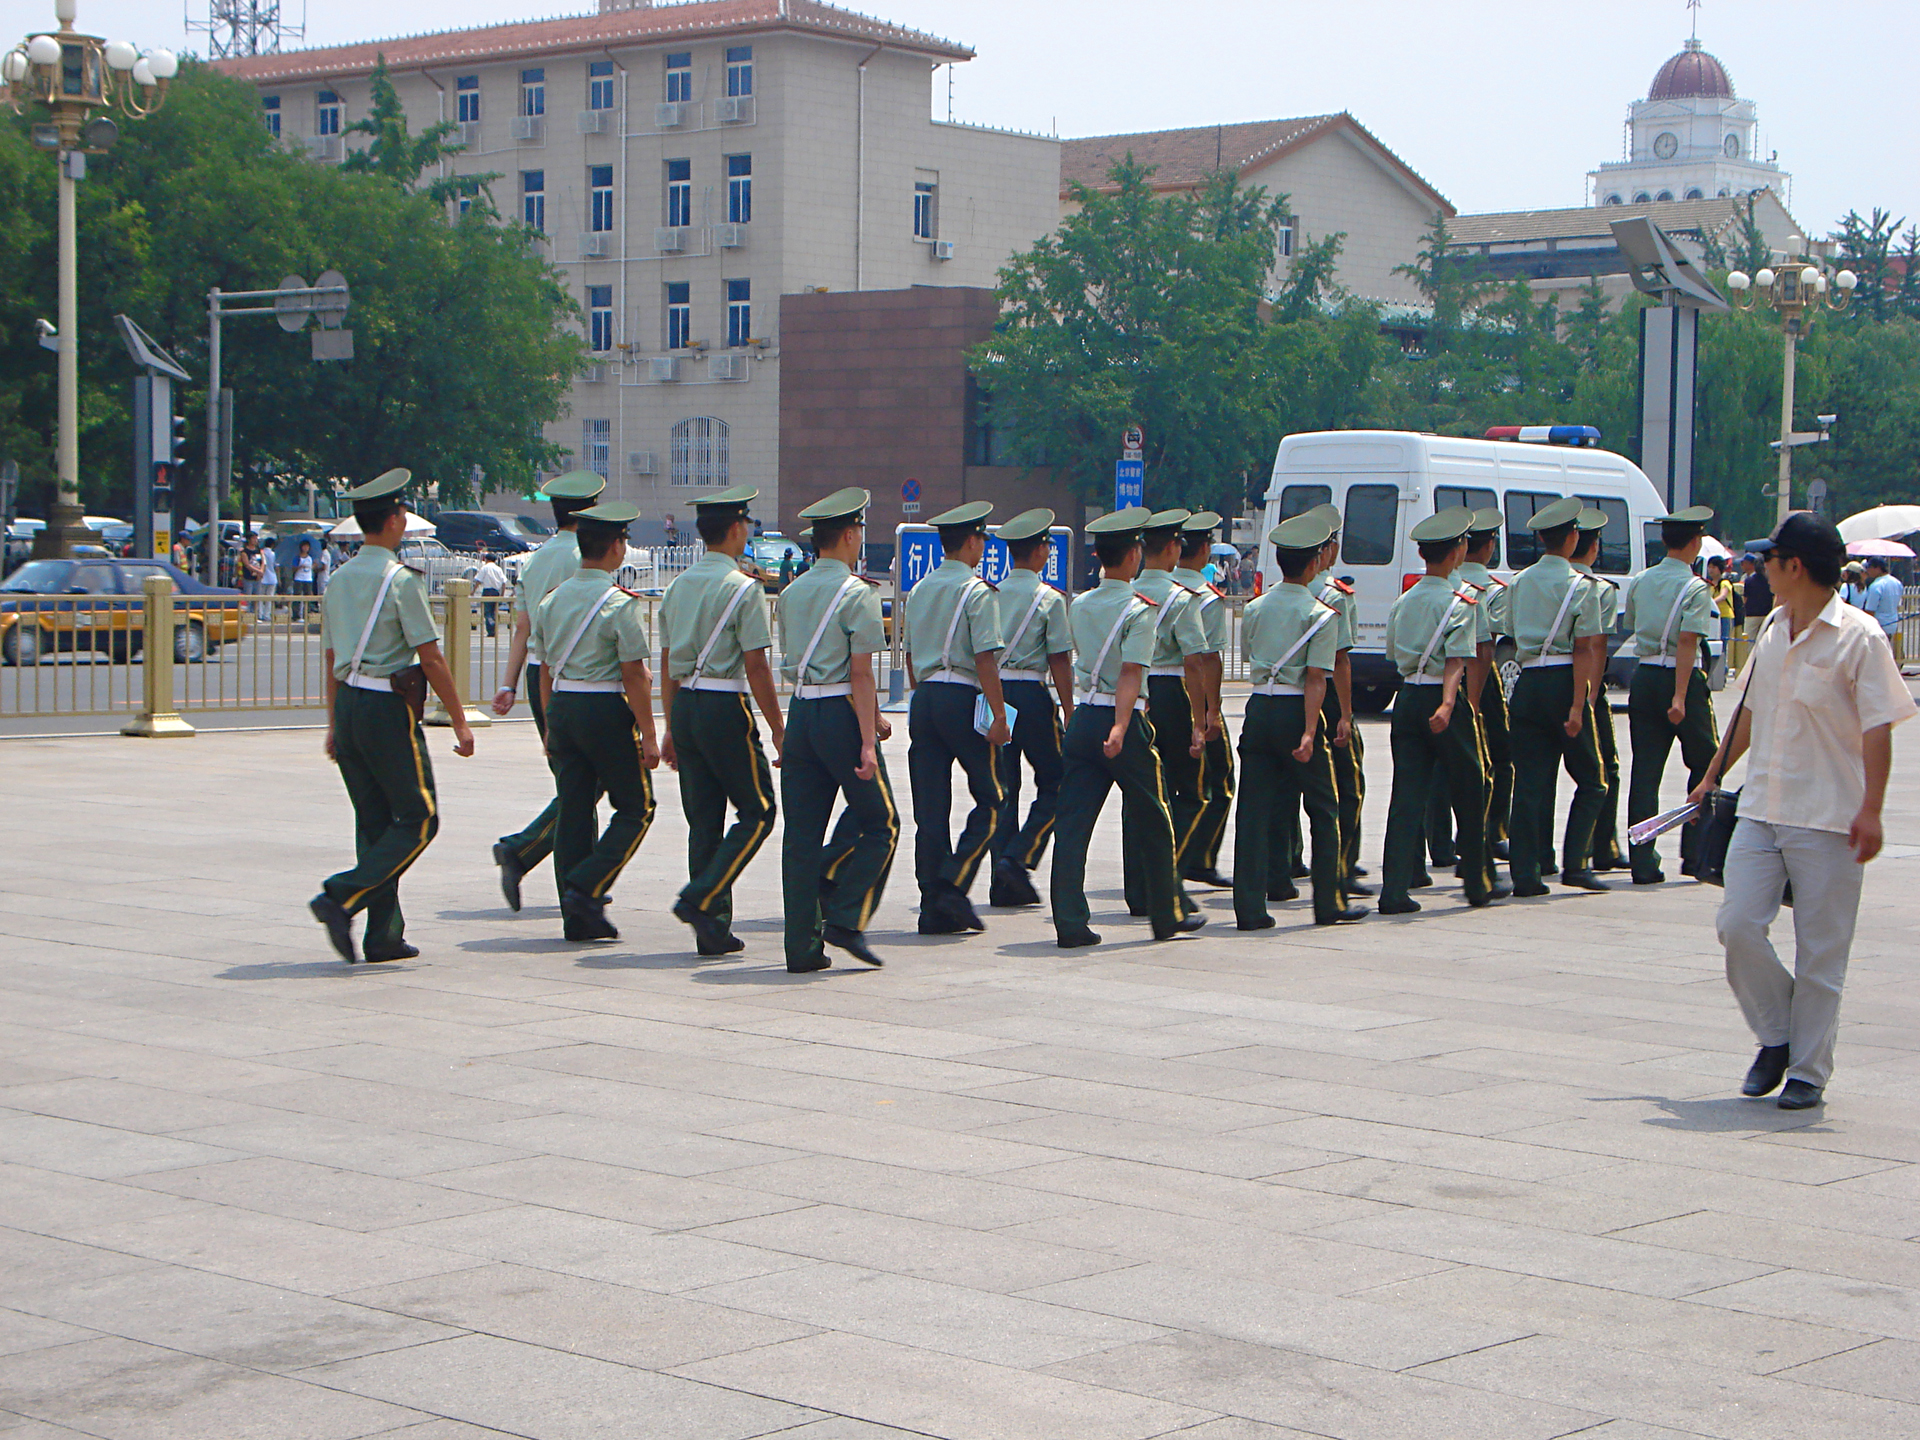 several military men walking on the pavement together